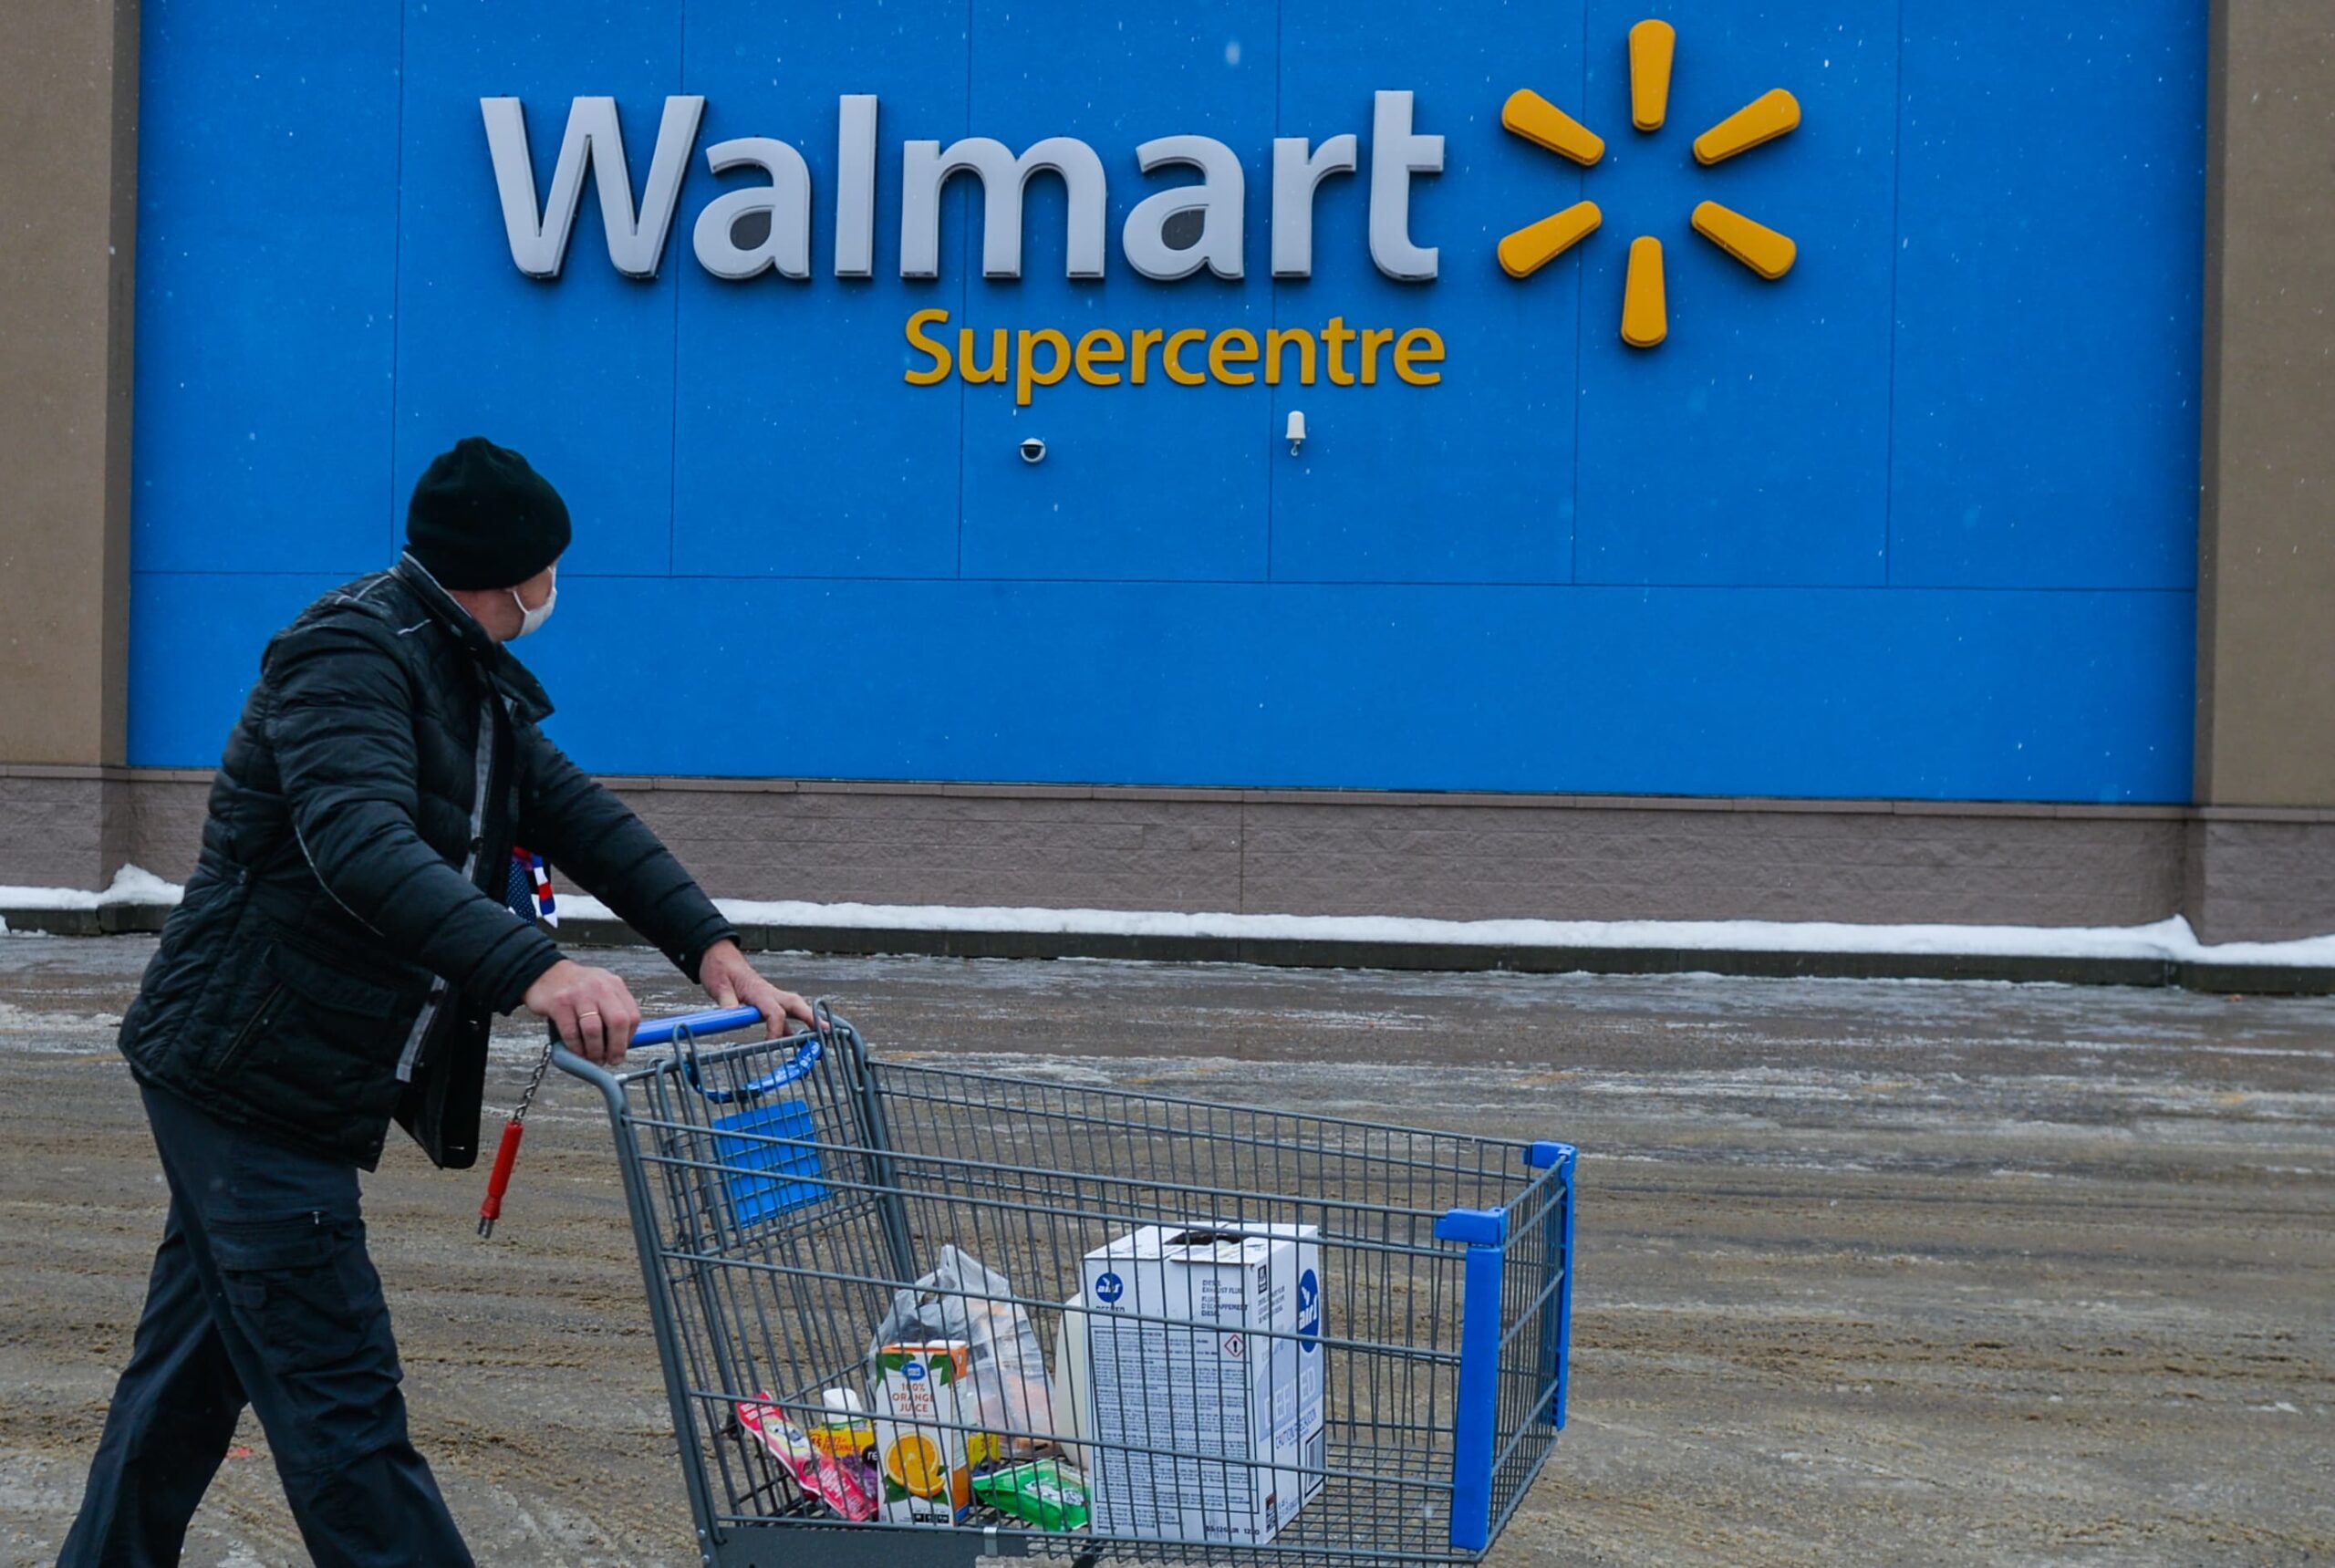 Cramer's Investing Club: We're trimming our Walmart holding to boost cash in volatile market